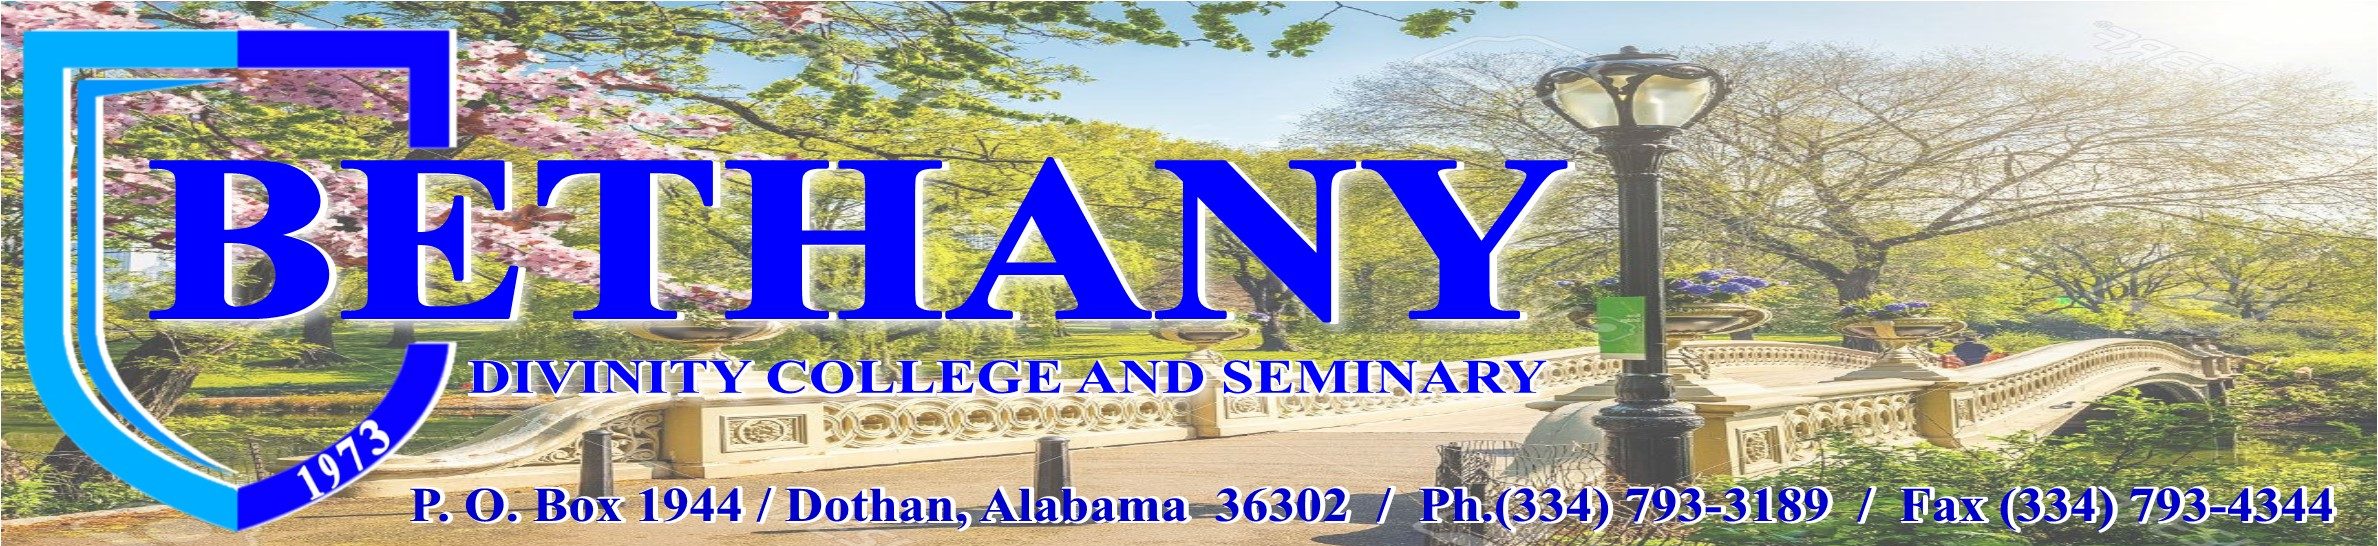 Bethany Divinity College and Seminary